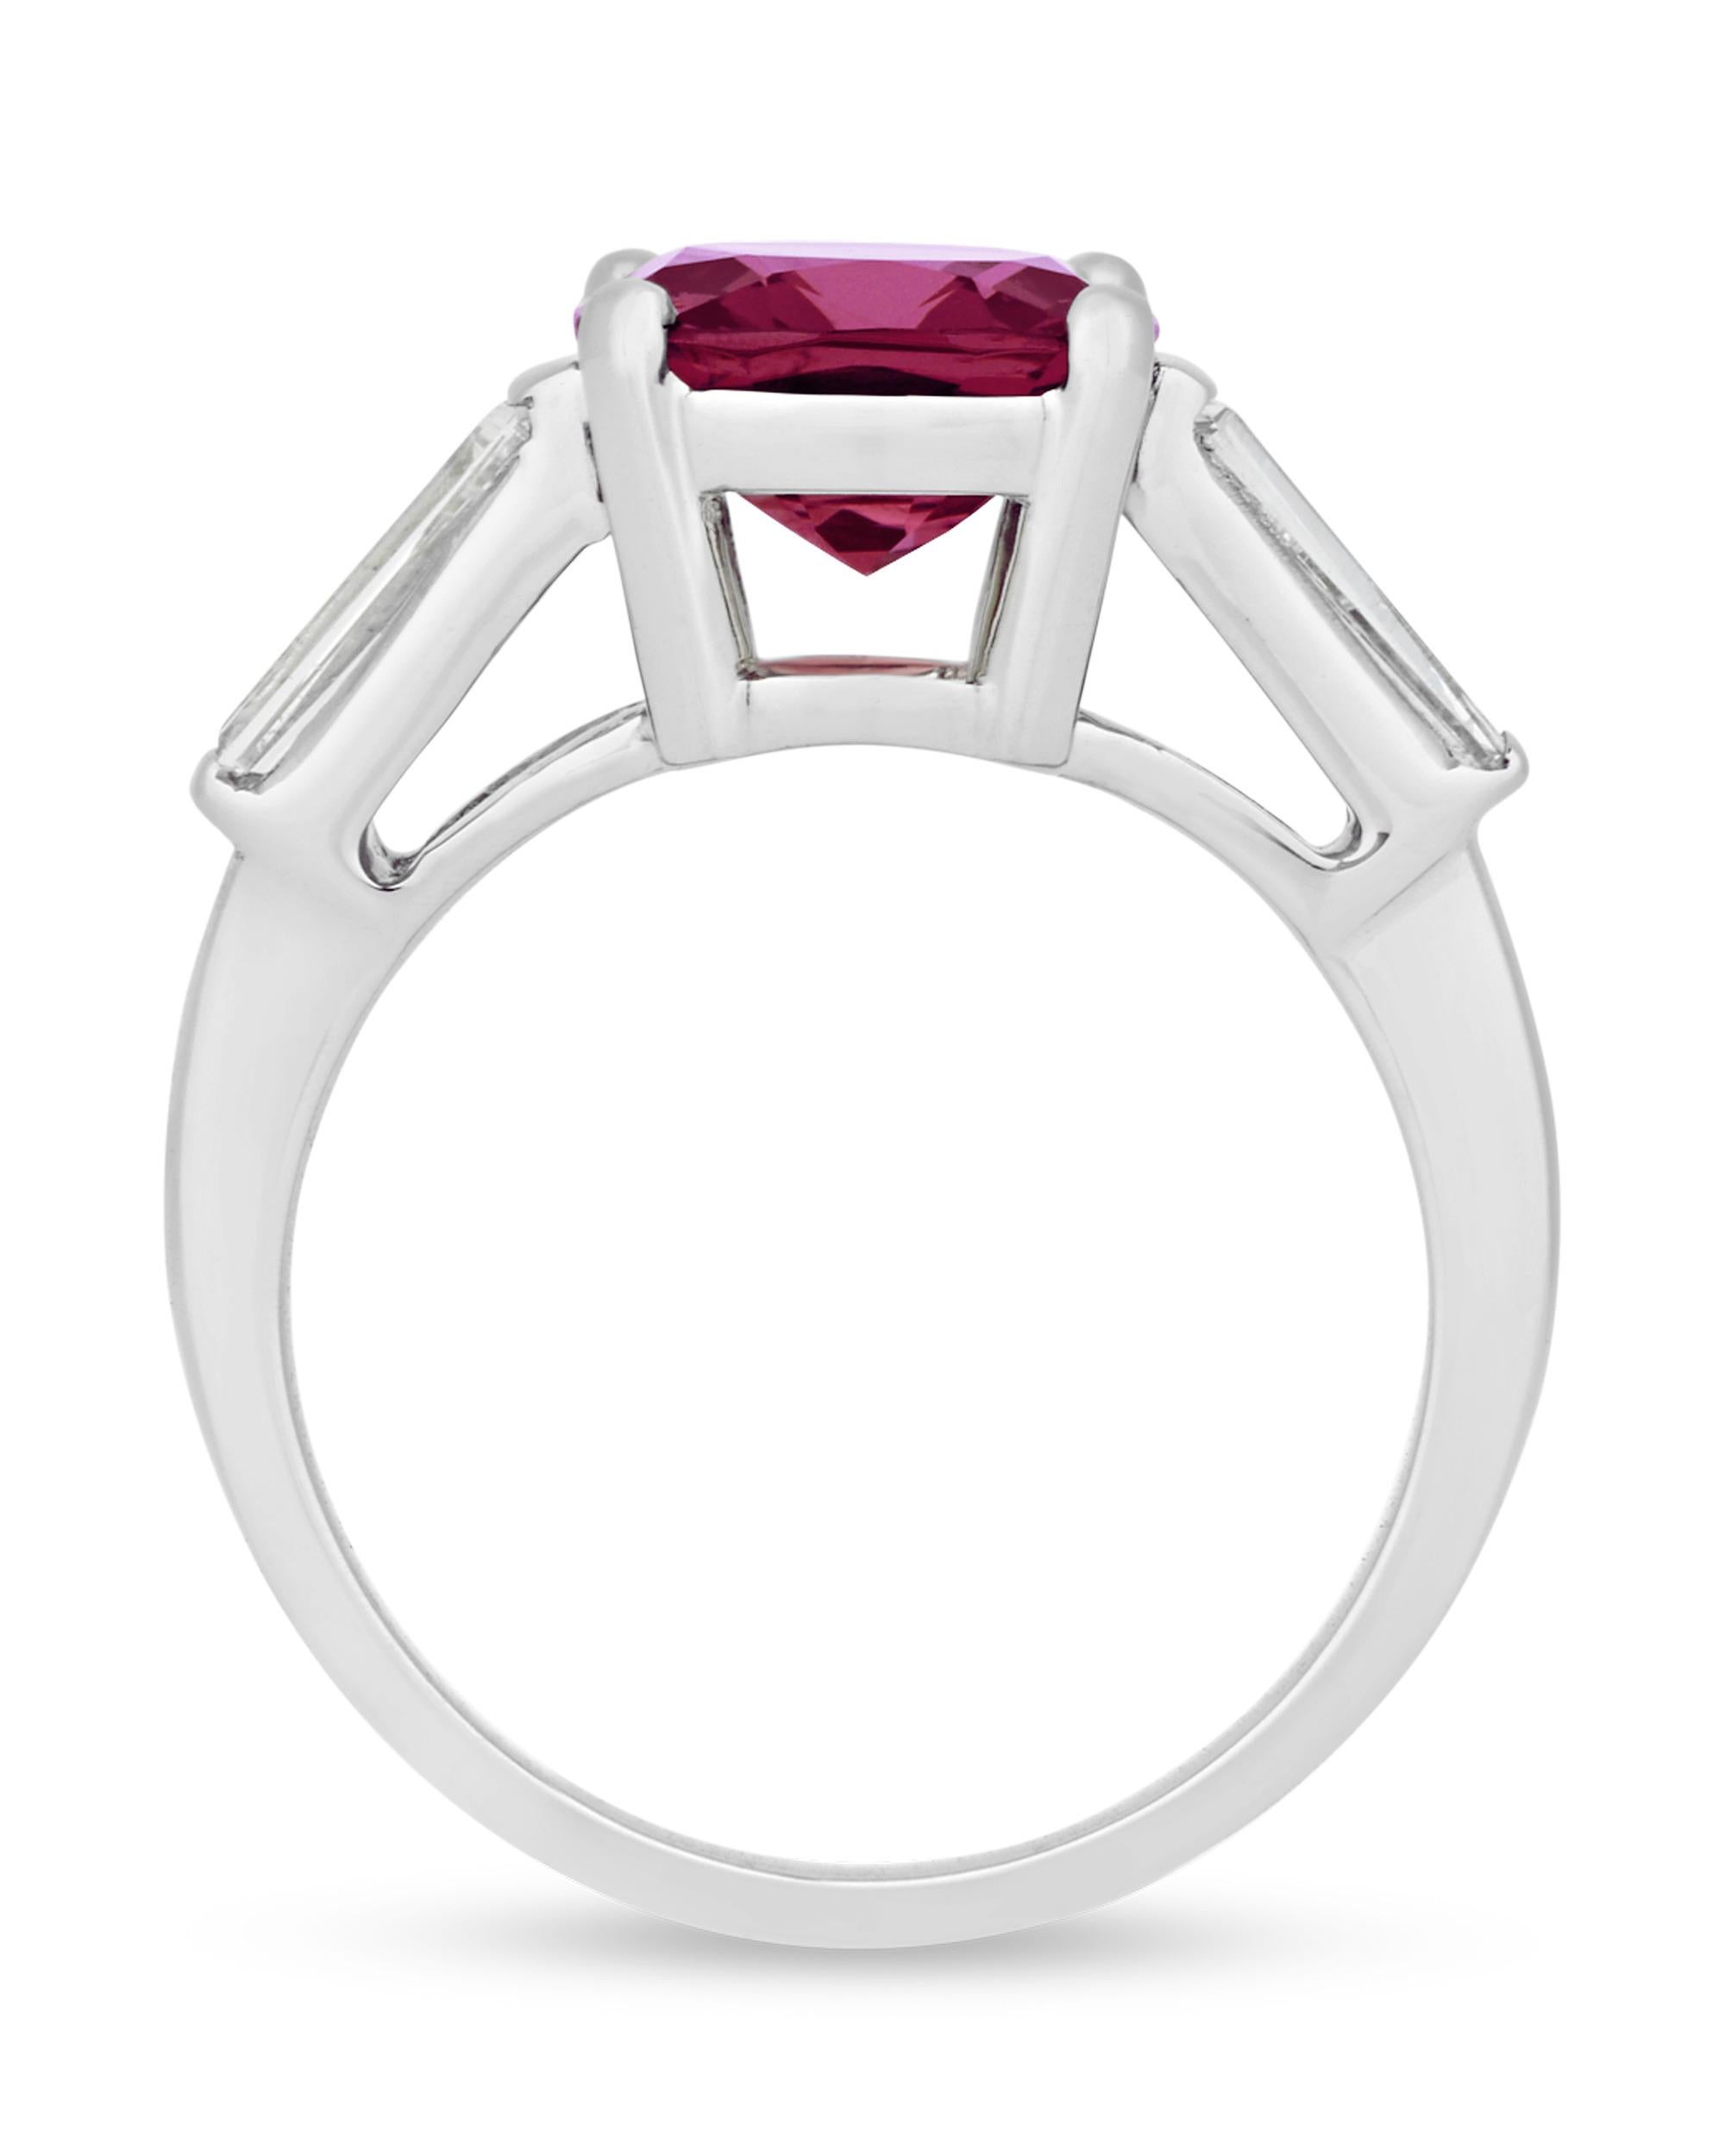 A sparkling red spinel captivates the eye in this ring. Exhibiting a deep crimson color, this 3.27-carat jewel is set in platinum between diamonds totaling 0.35 carat. Though often mistaken for rubies or sapphires, spinels have experienced a surge